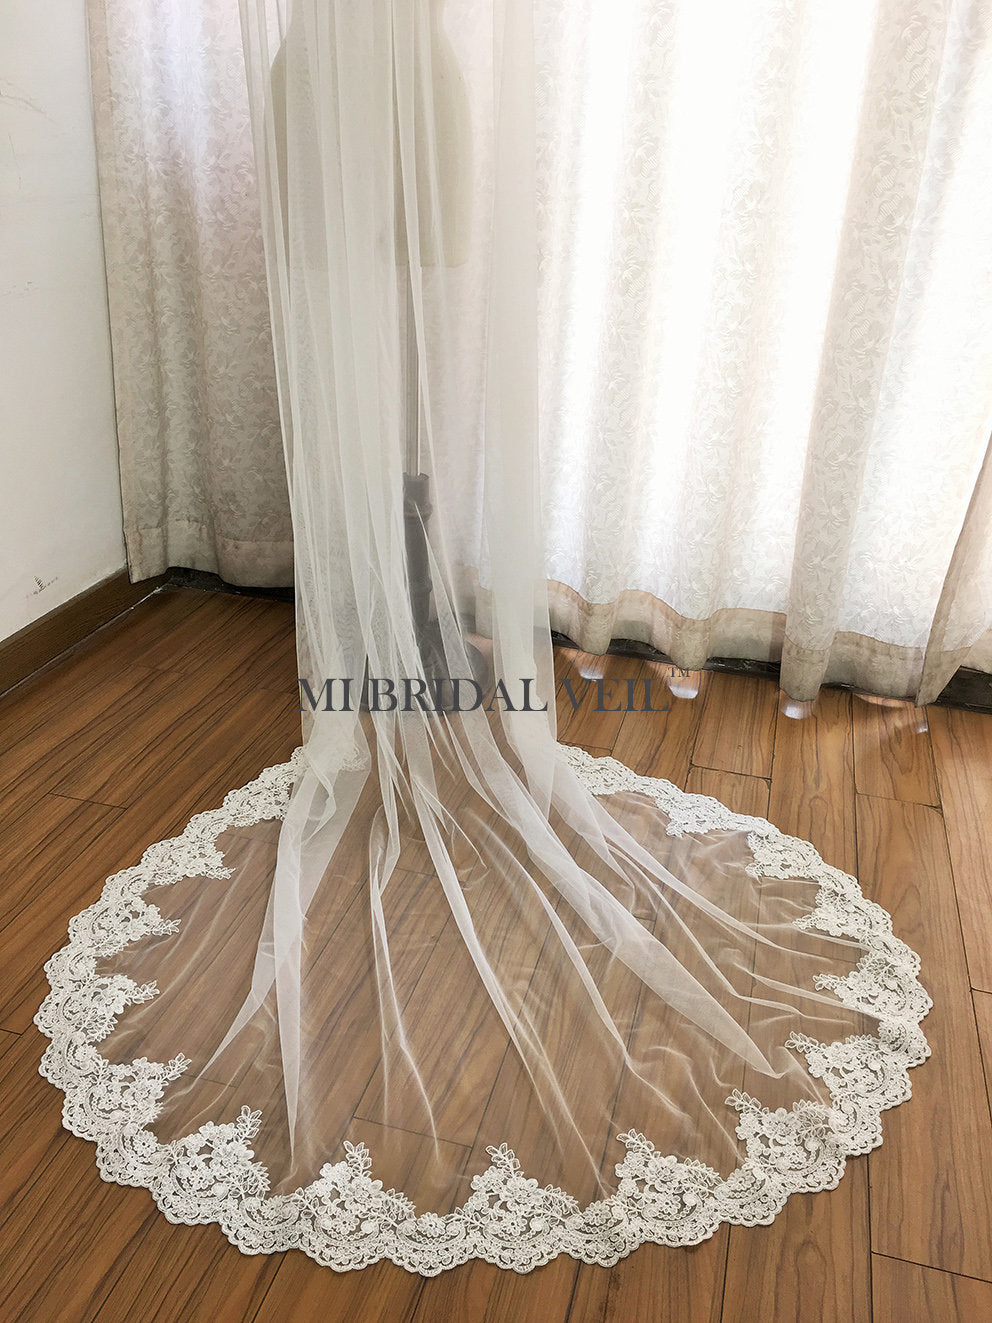 Cathedral Rose Lace Wedding Veil Partial Lace on Bottom, Mi Bridal